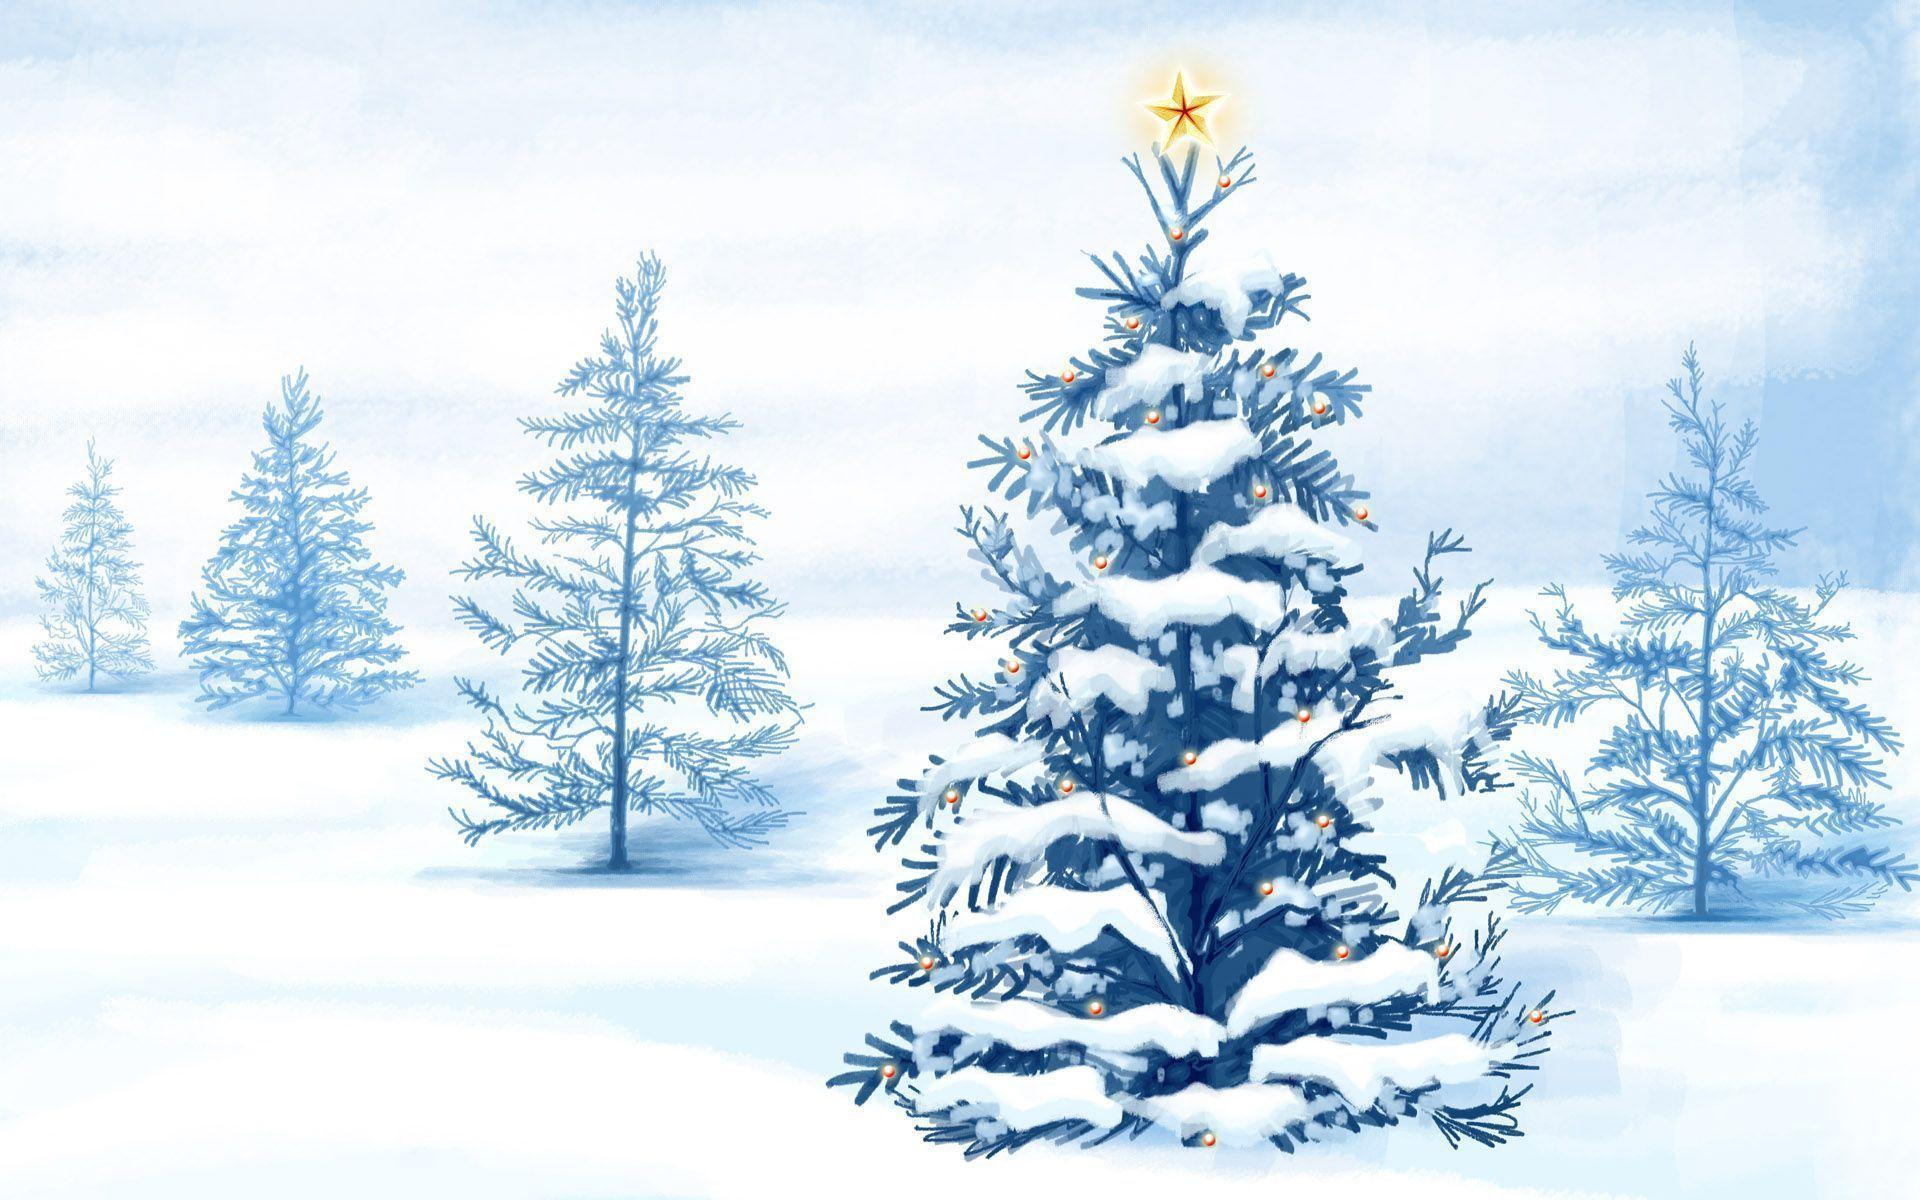 Snowy Christmas wallpaper. Snowy Christmas background